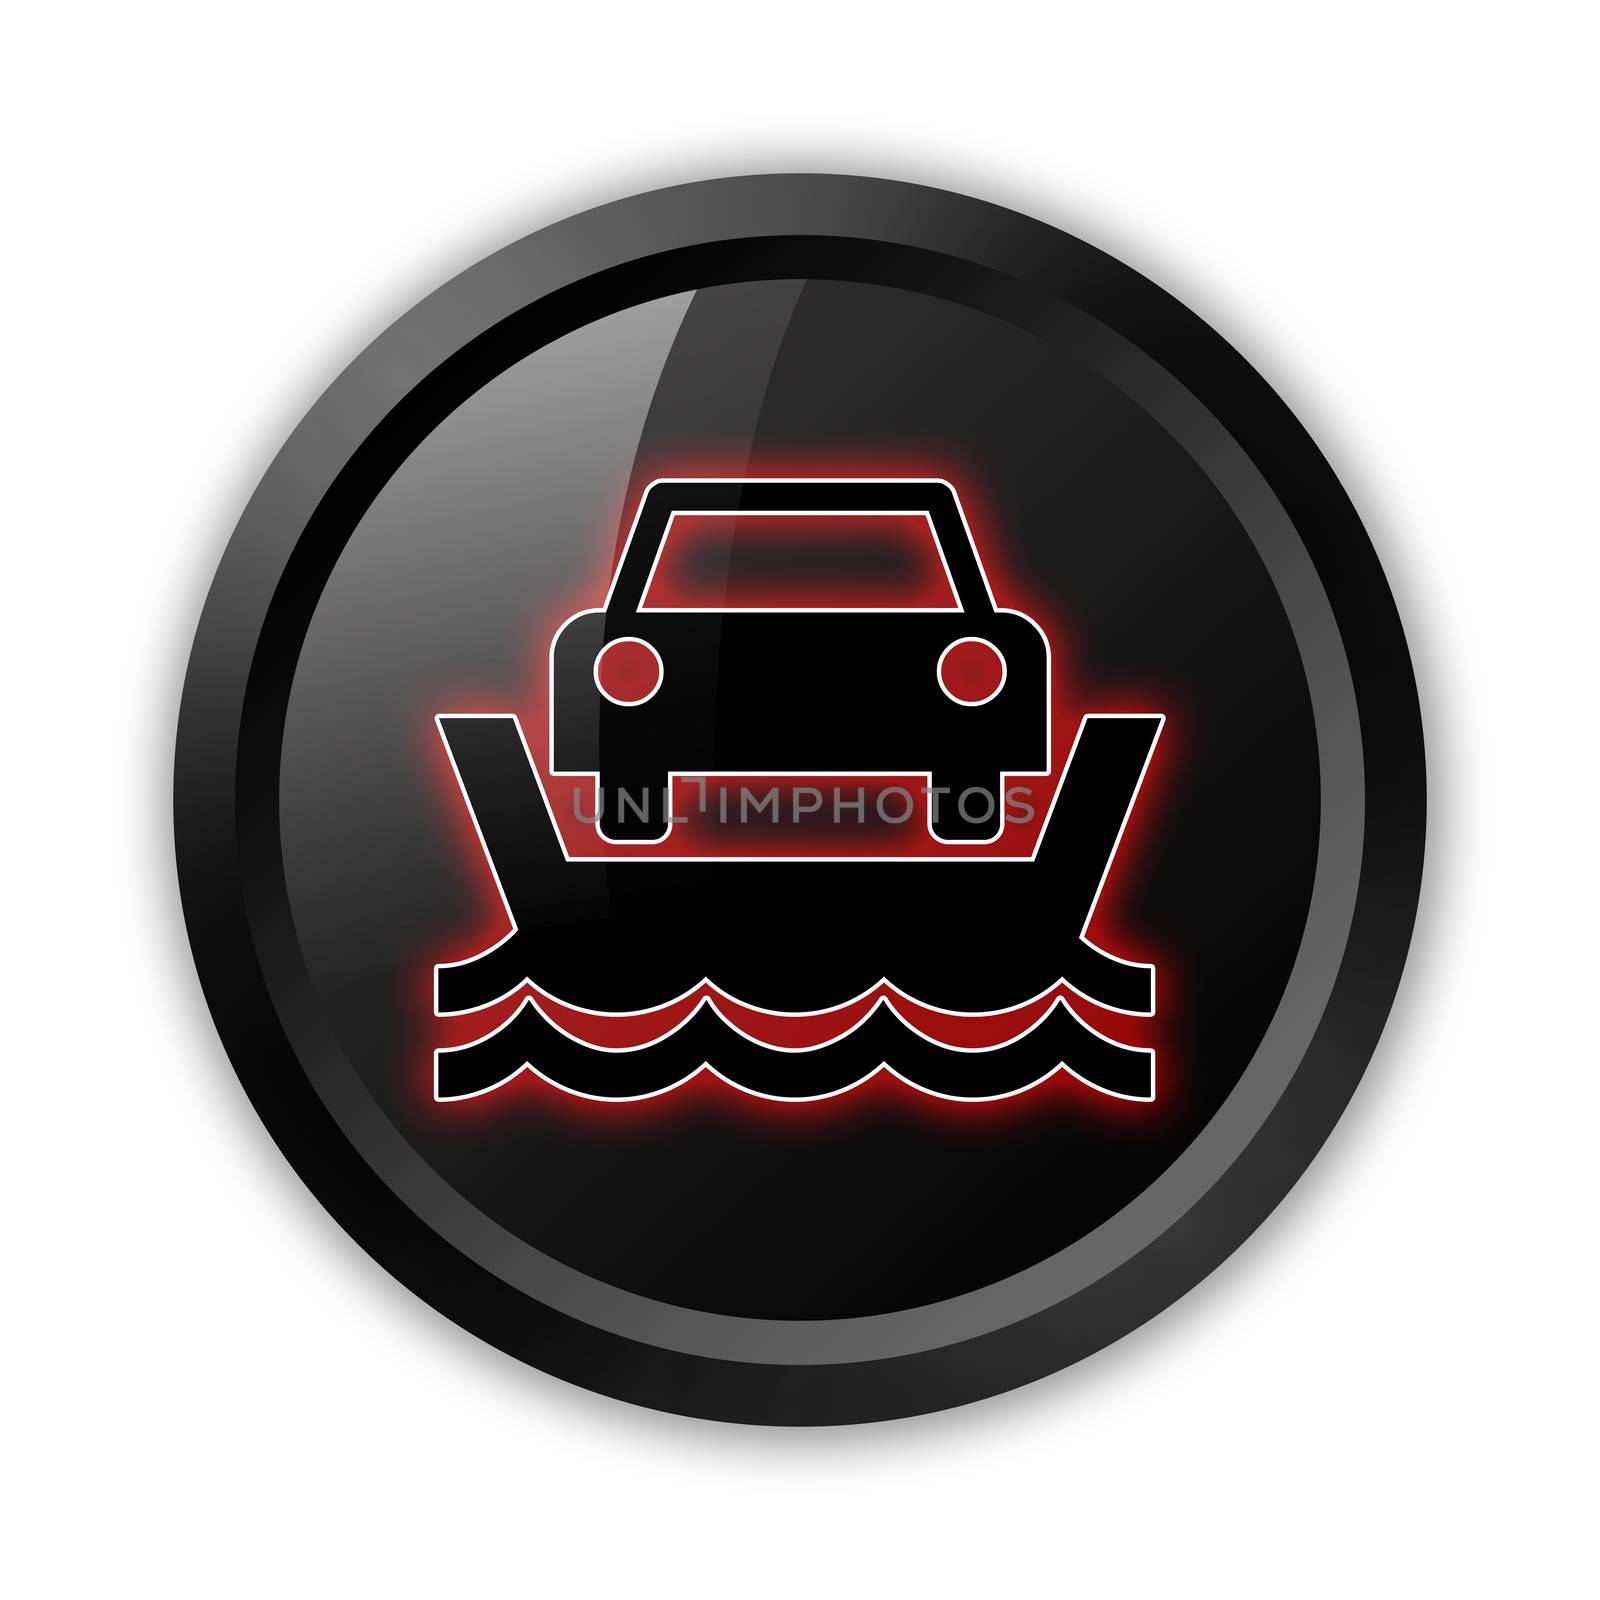 Icon, Button, Pictogram with Vehicle Ferry symbol